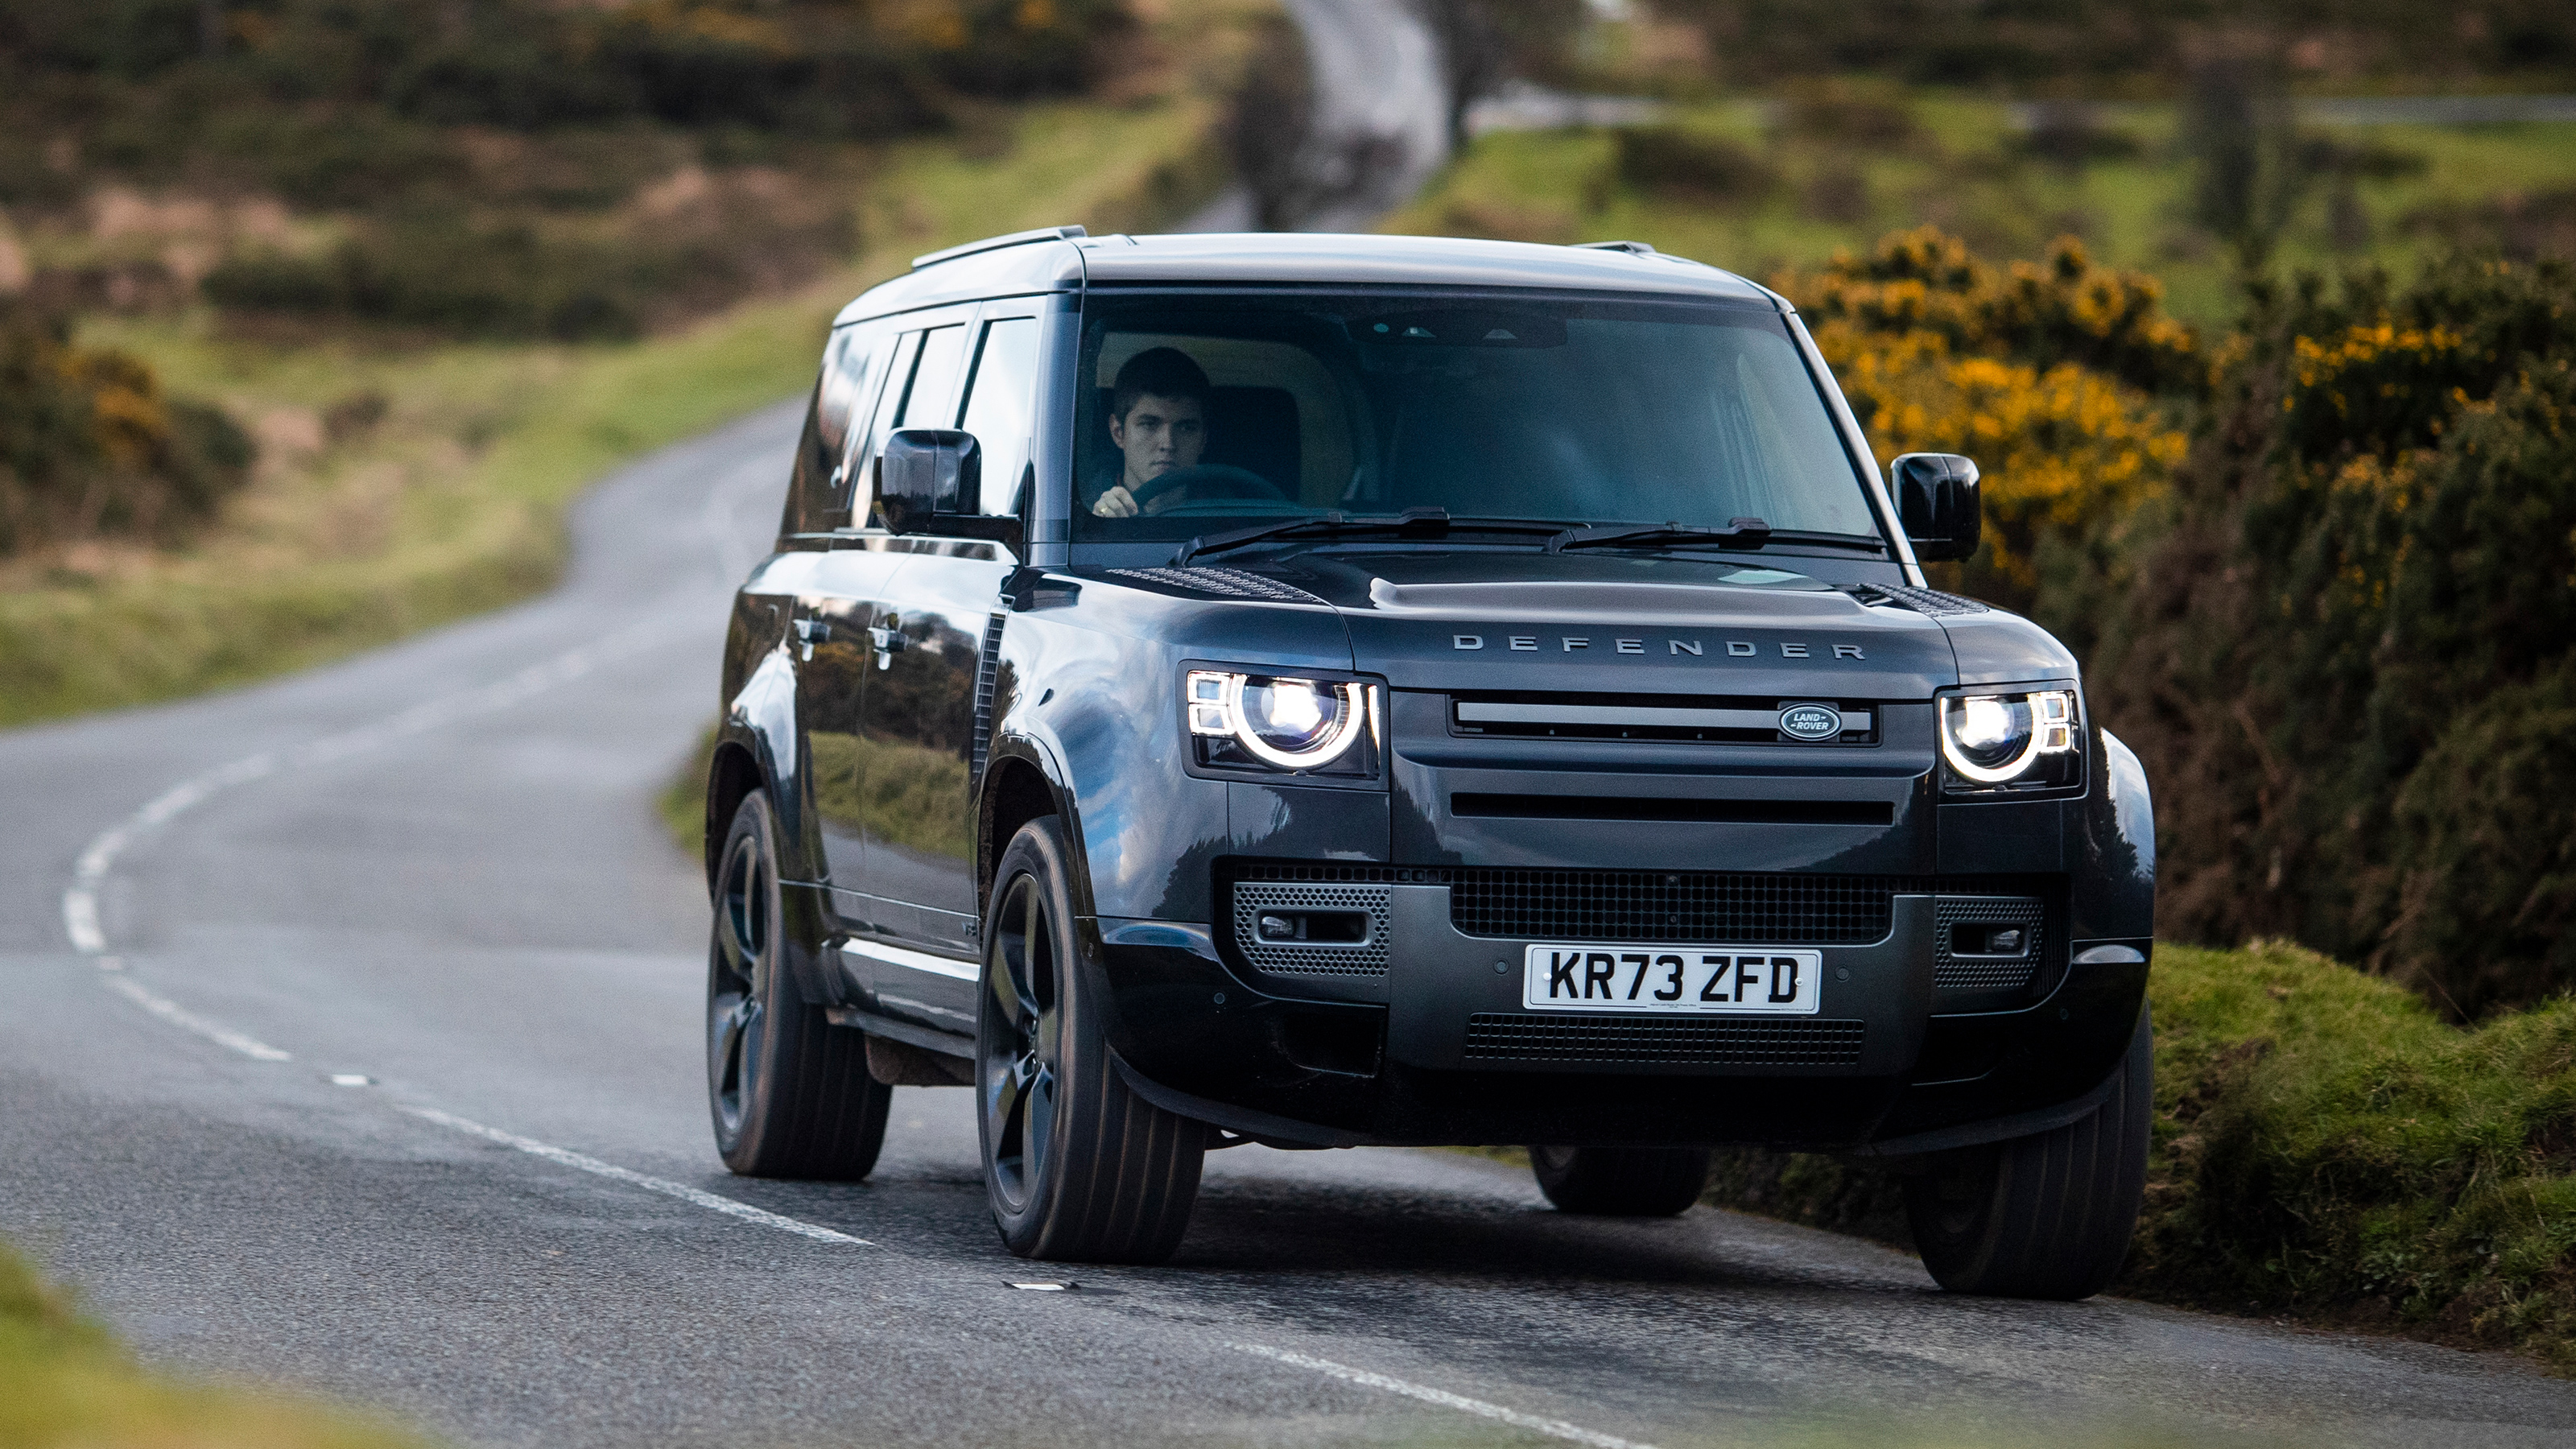 2022 Land Rover Defender 90 V8 Review: More Power, More Character